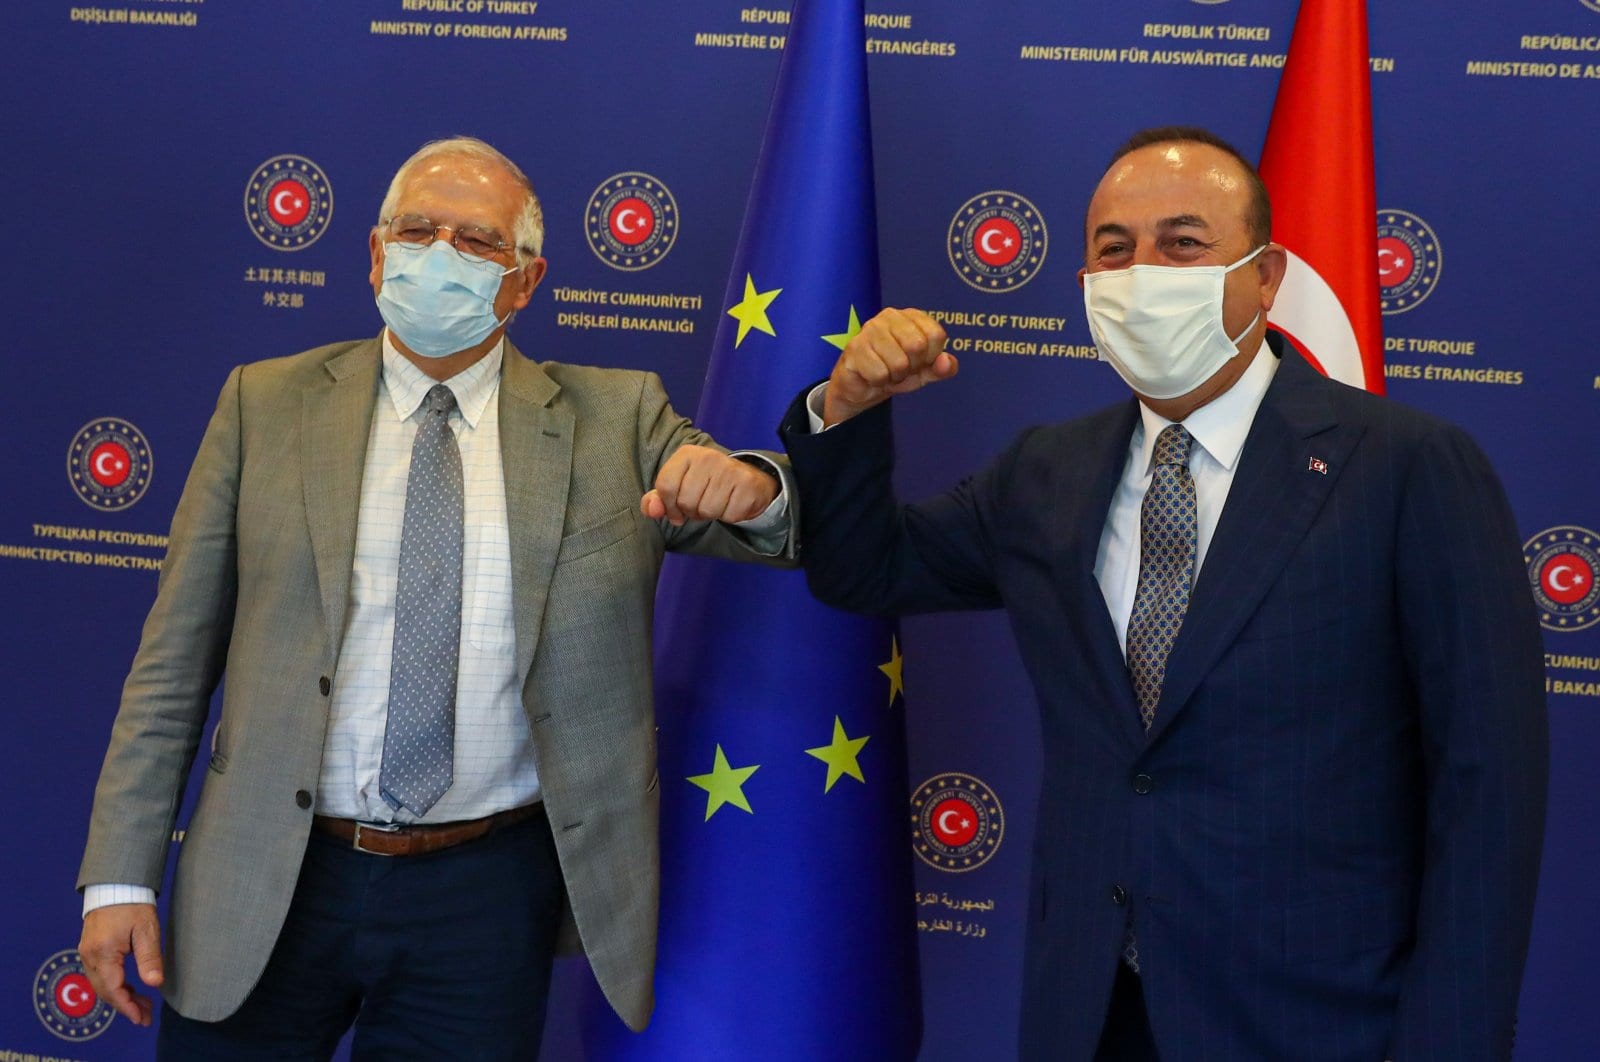 Çavuşoğlu, EU&#8217;s foreign policy chief discussed bilateral ties, regional issues in Brussels